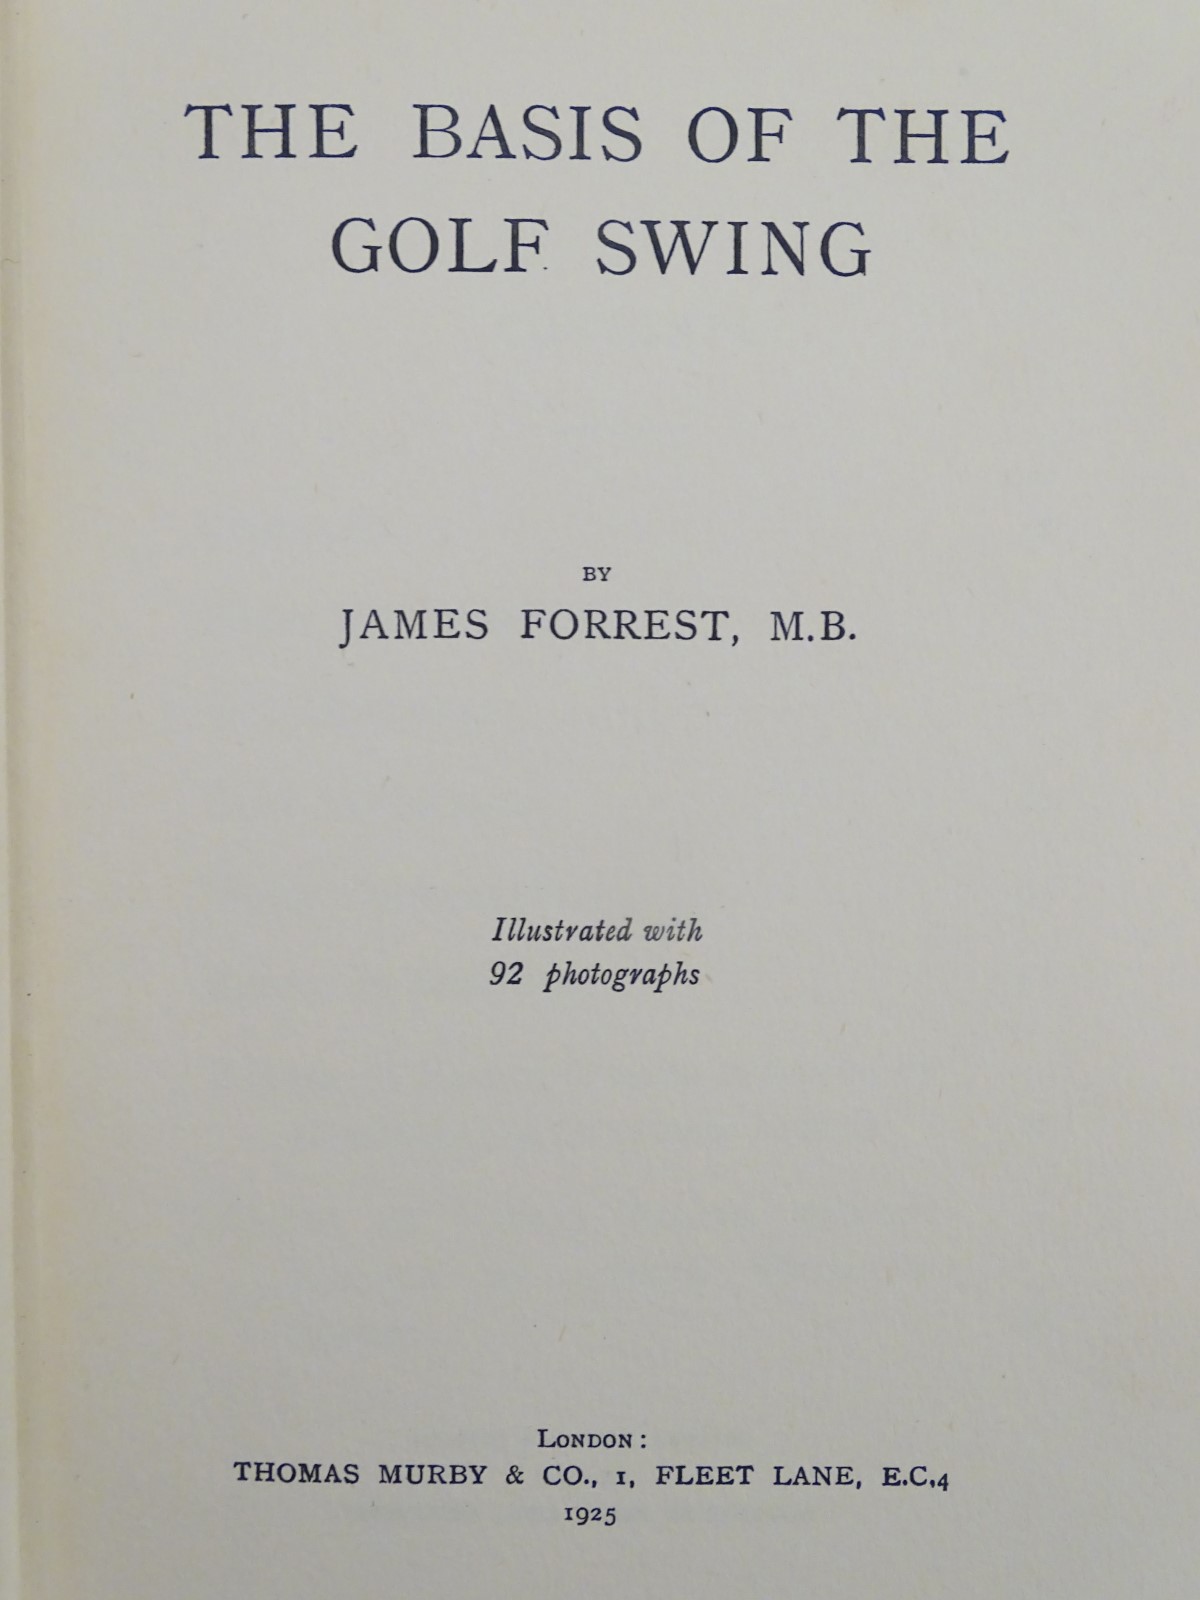 Books: How to Play Golf, by Harry Vardon, Golfing By-Paths by Bernard Darwin, - Image 6 of 6